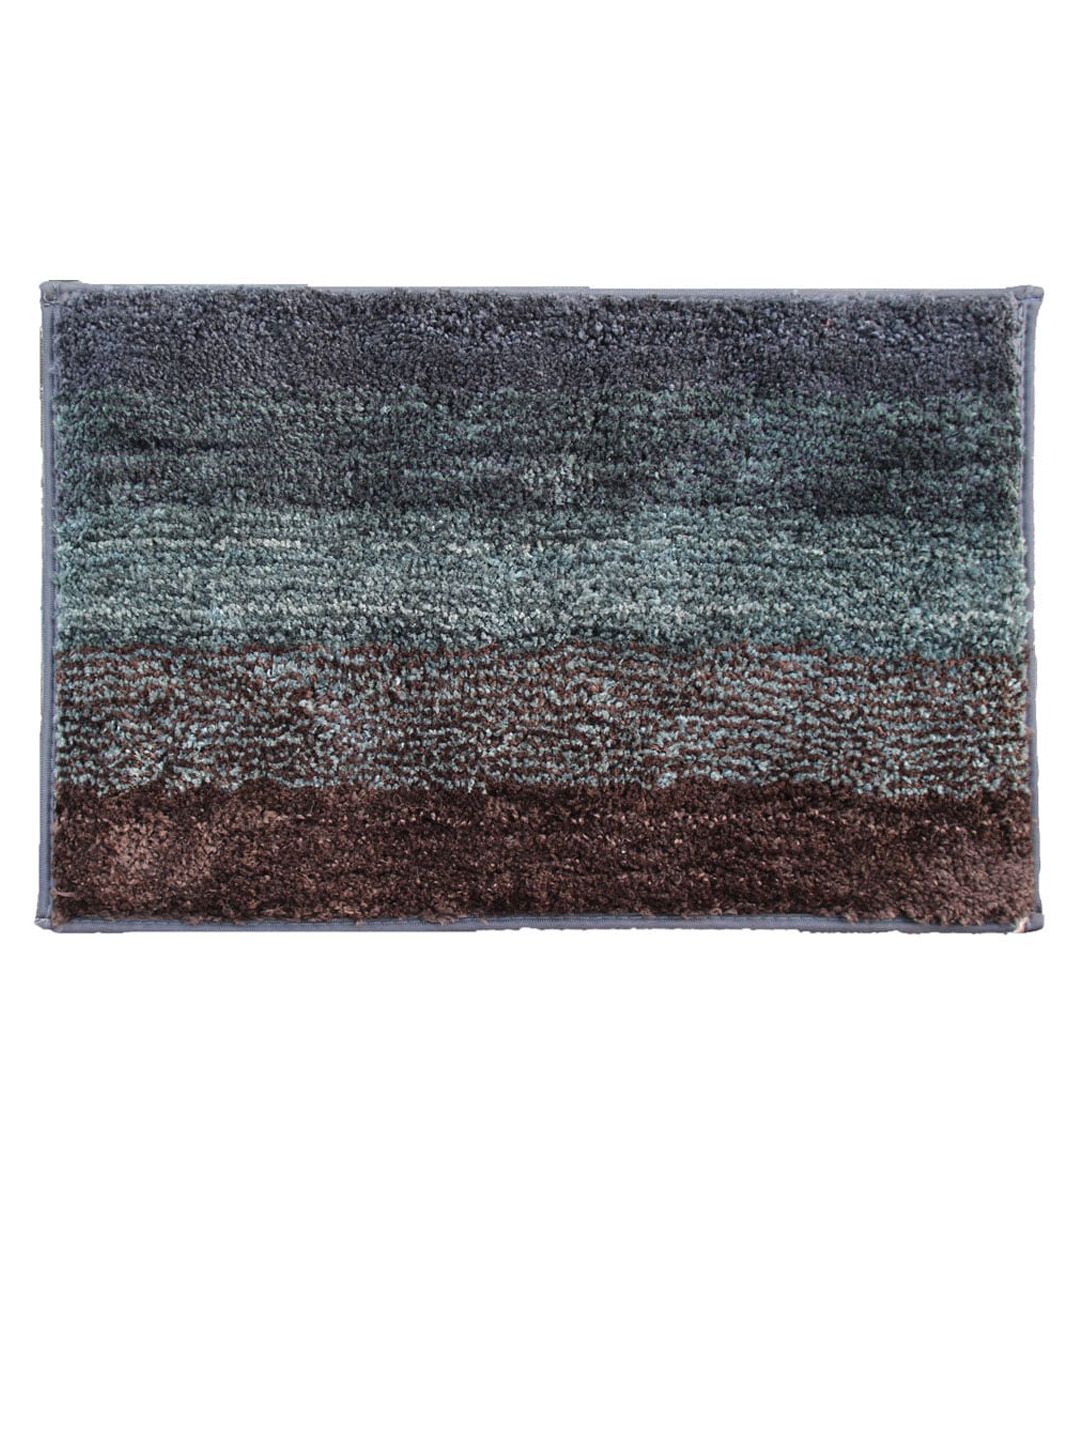 LUXEHOME INTERNATIONAL Green Striped Printed 1600GSM Bath Rugs Price in India